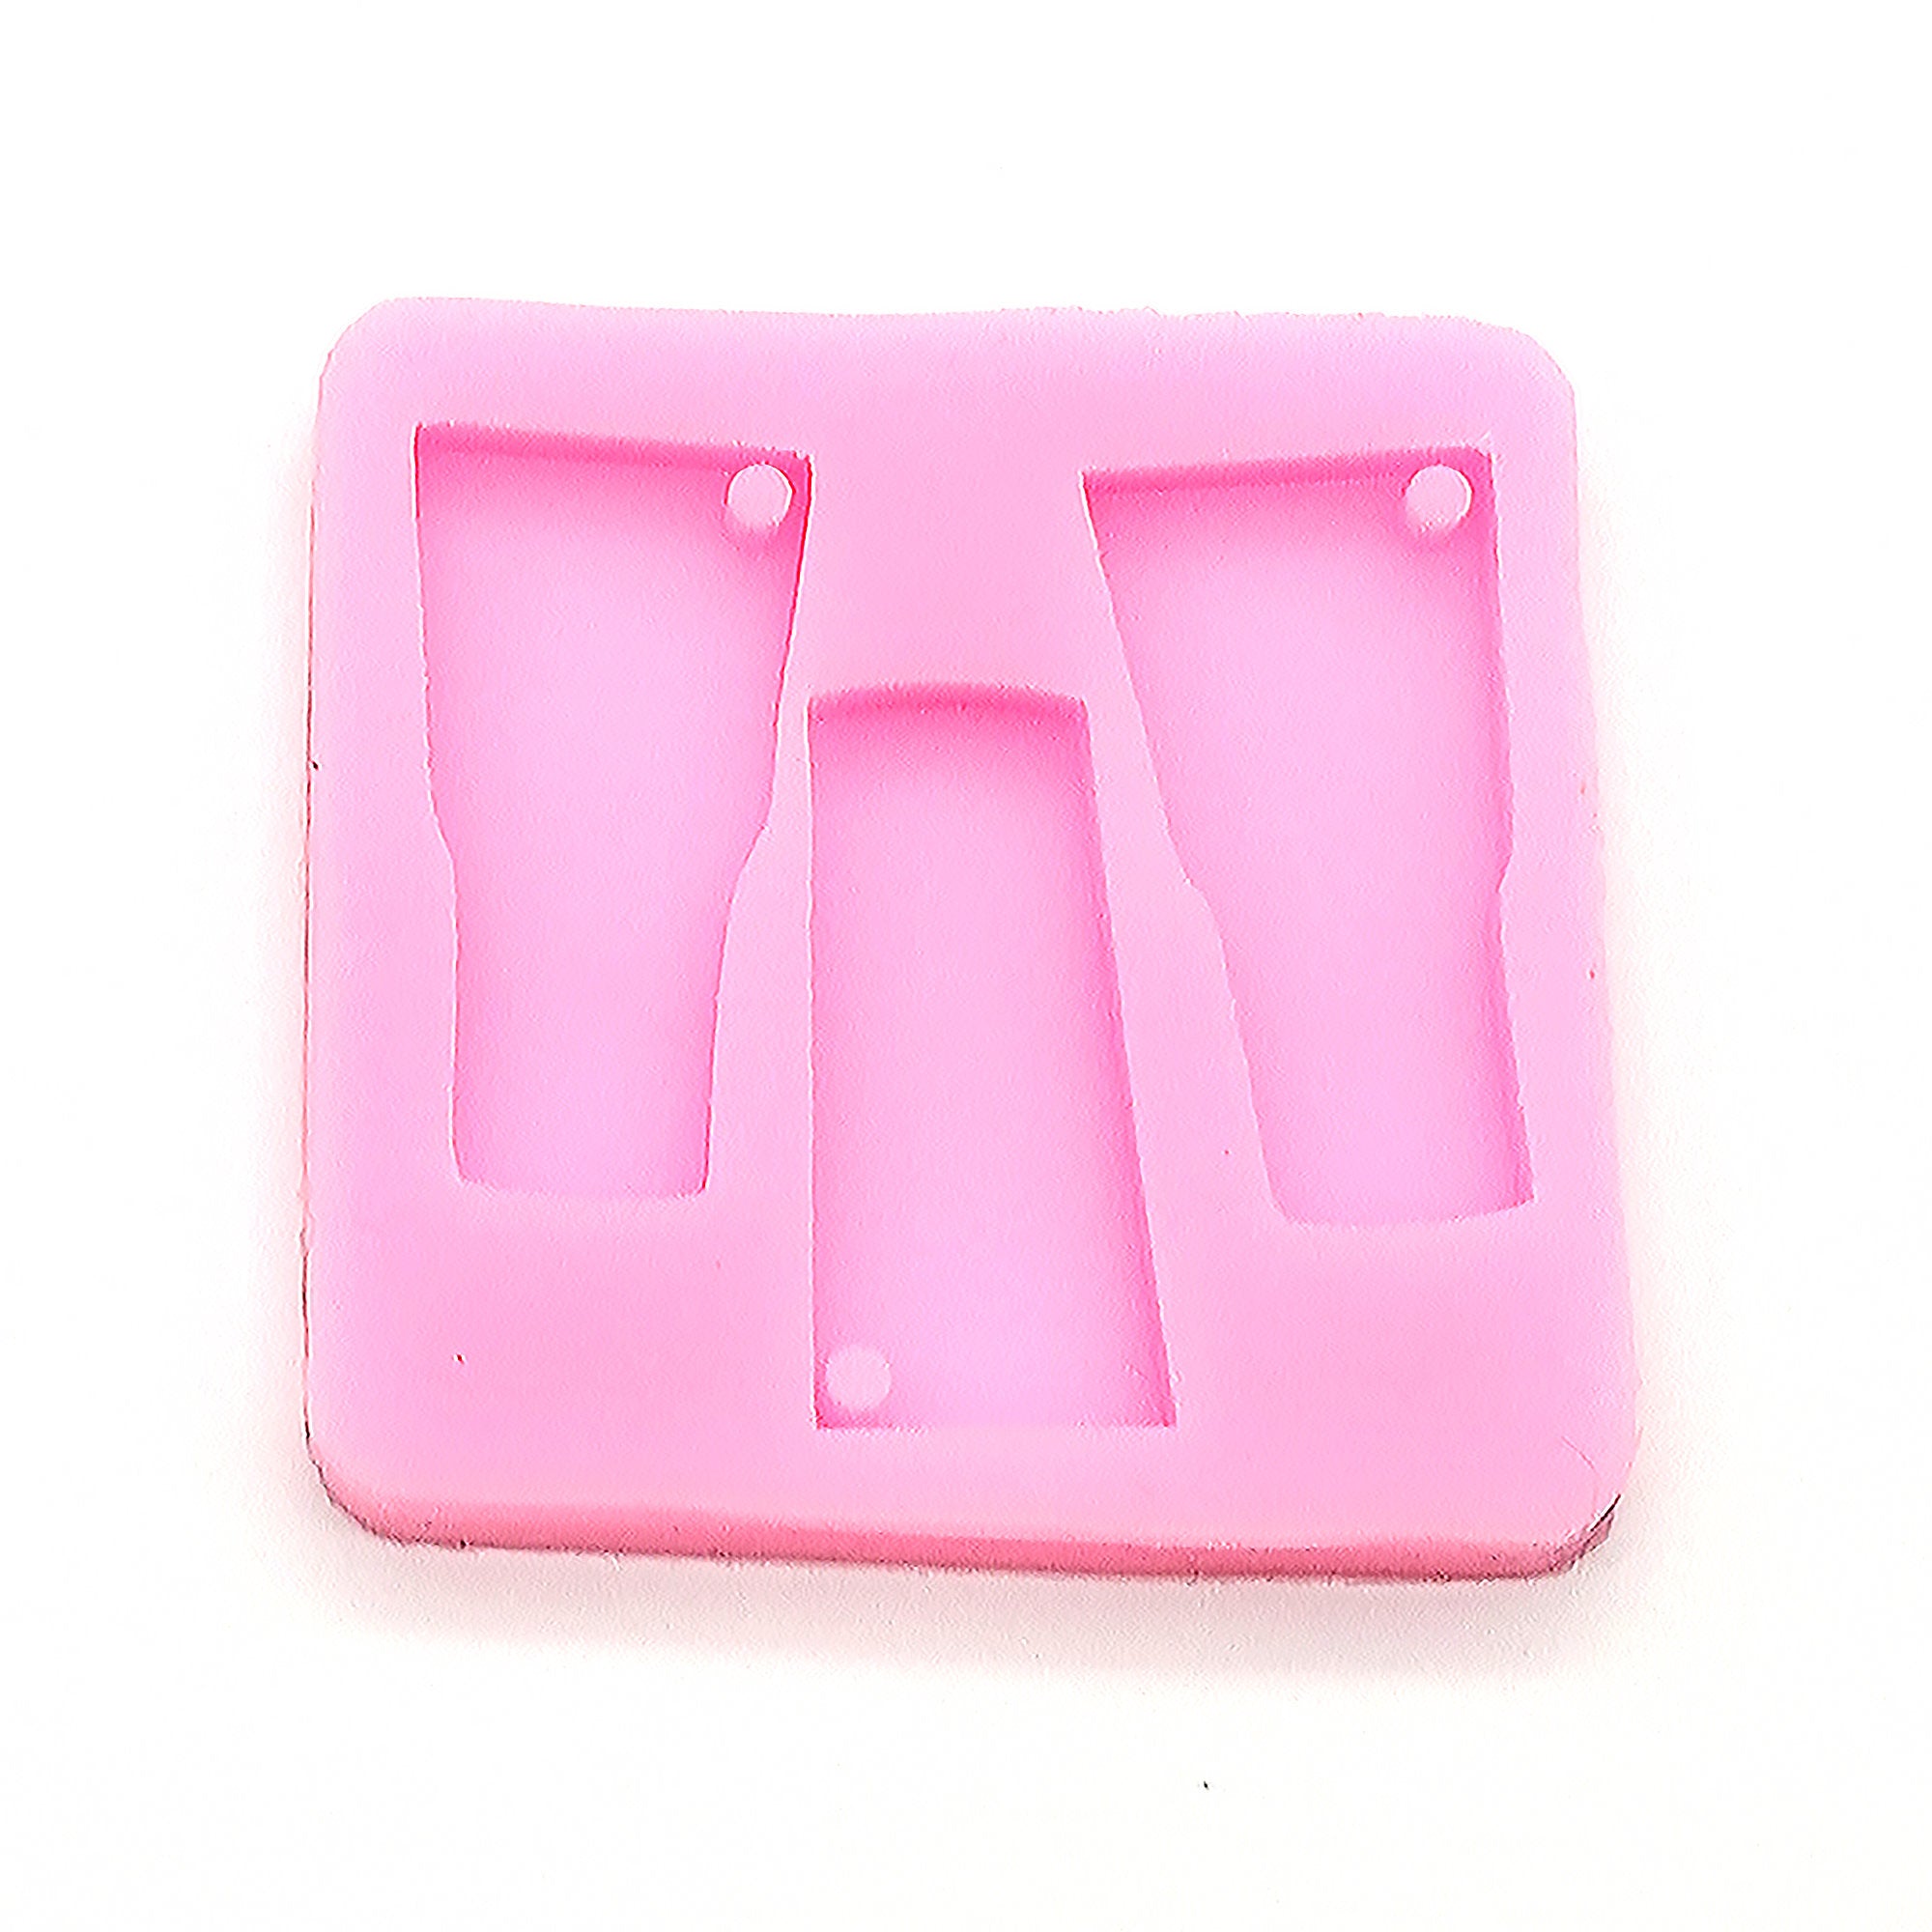 Tumbler Cup Silicone Mold for Epoxy Resin Keychain - Jewelry Making - Ornament Silicone Mold